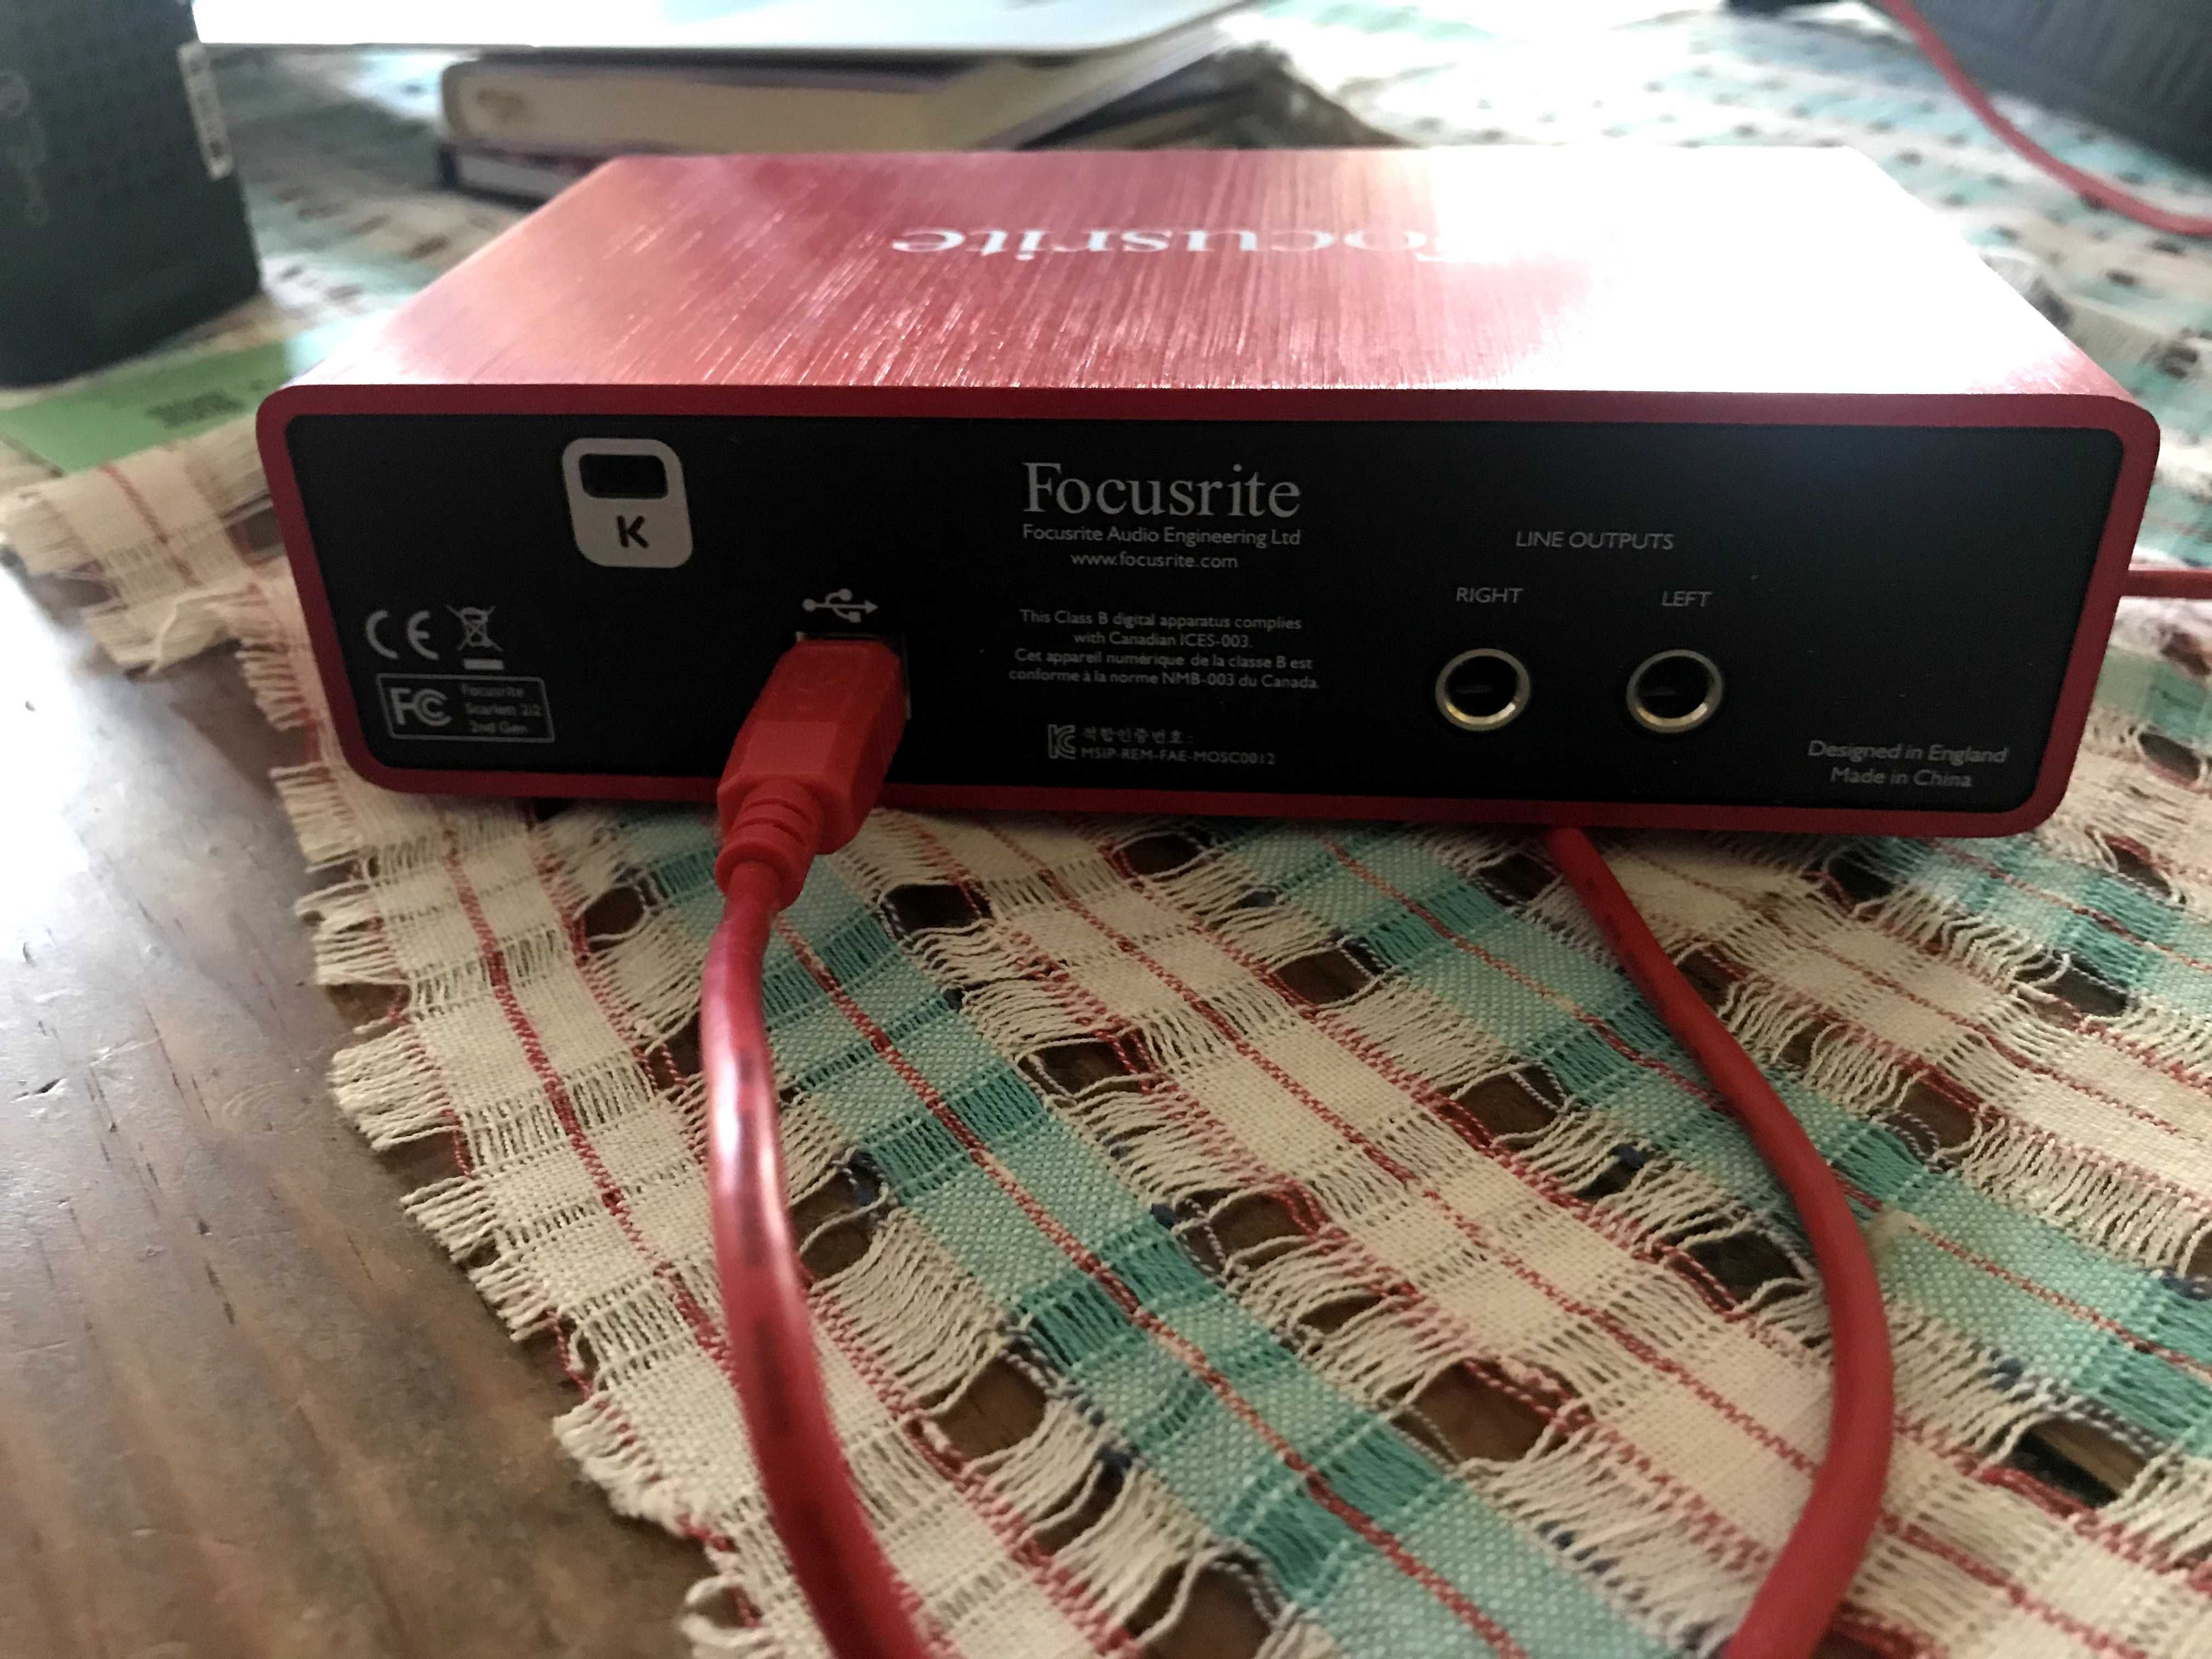 Scarlett 2i2 2nd generation 2-in/2-out USB audio interface